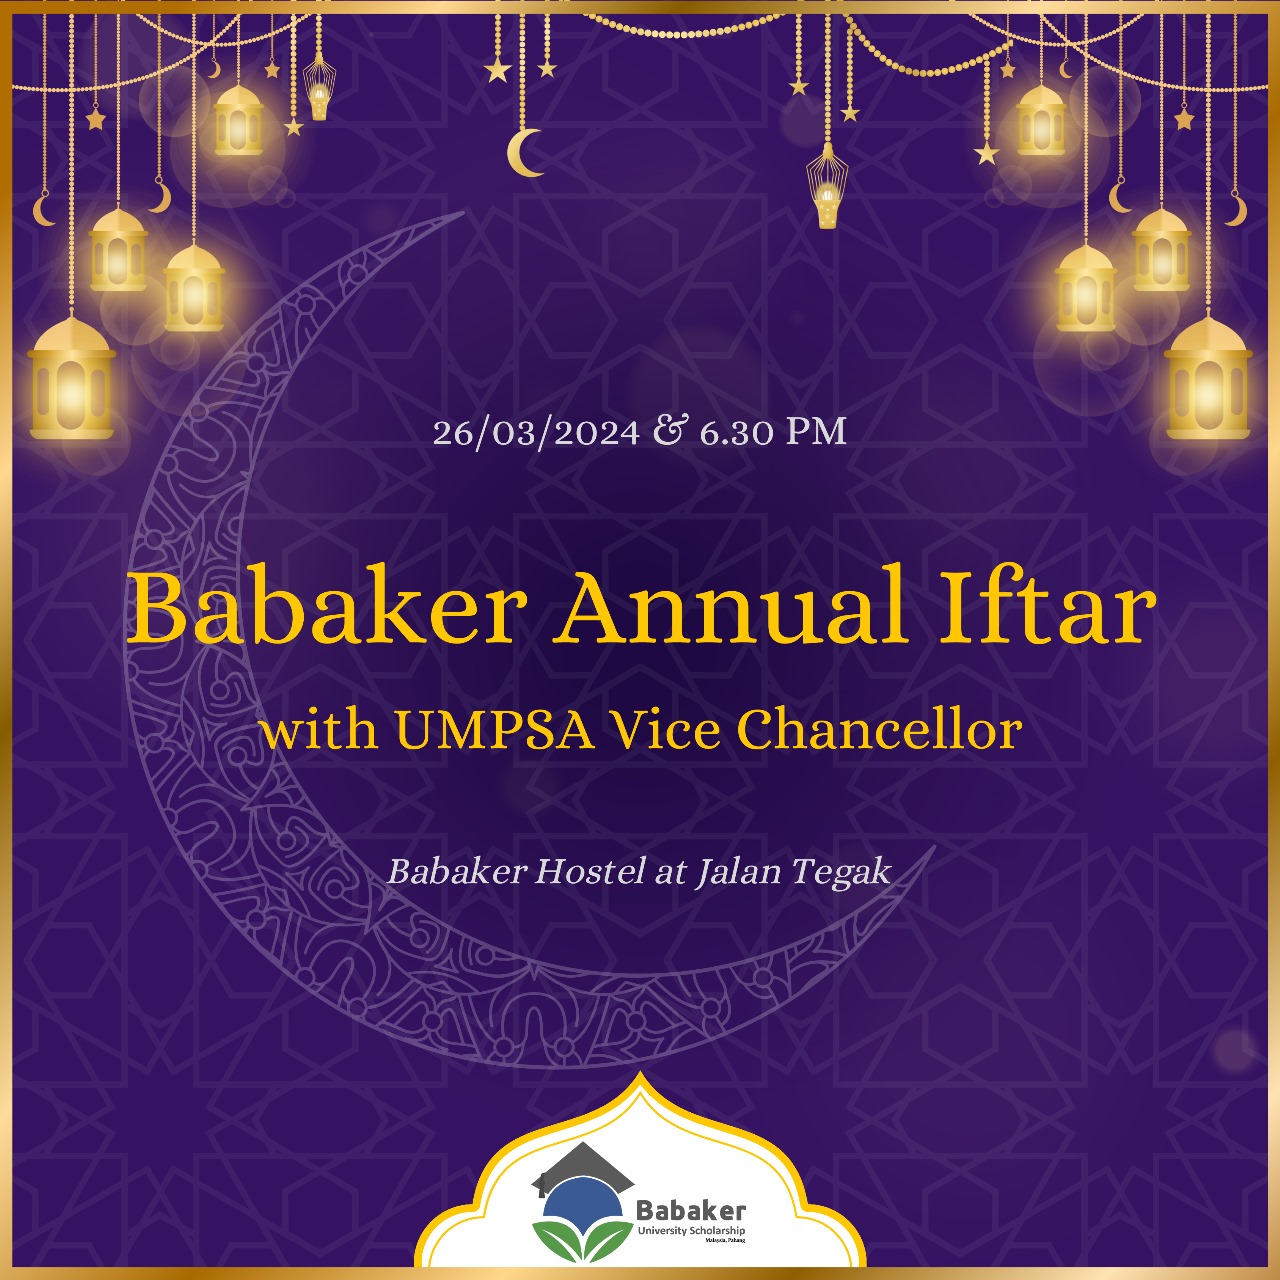 BABAKER ANNUAL IFTAR WITH UMPSA VICE CHANCELLOR